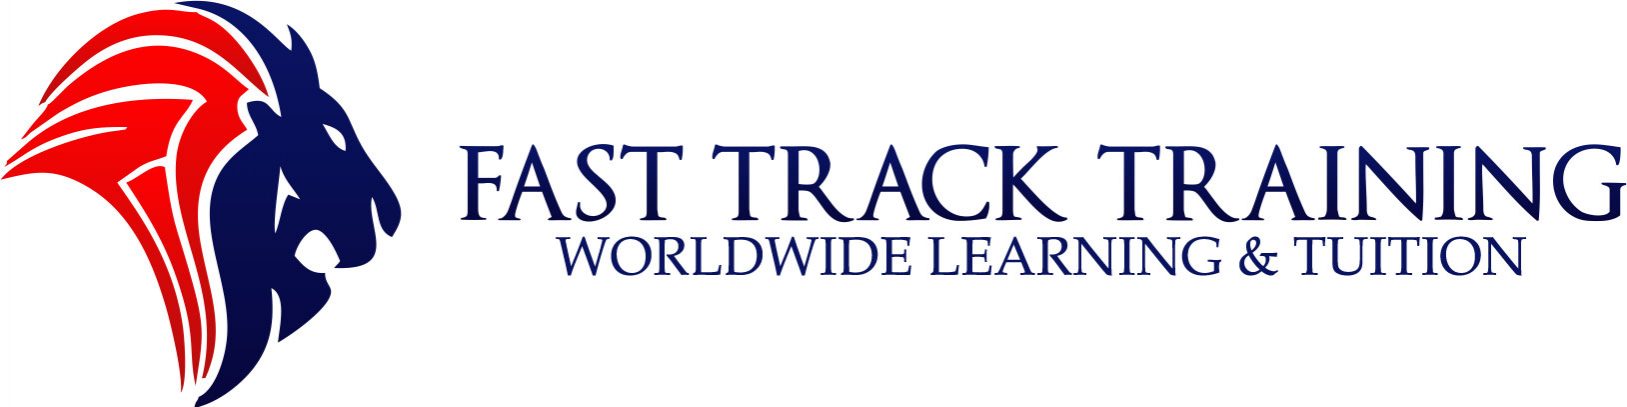 Fast Track Training World Wide Learning and Tuition